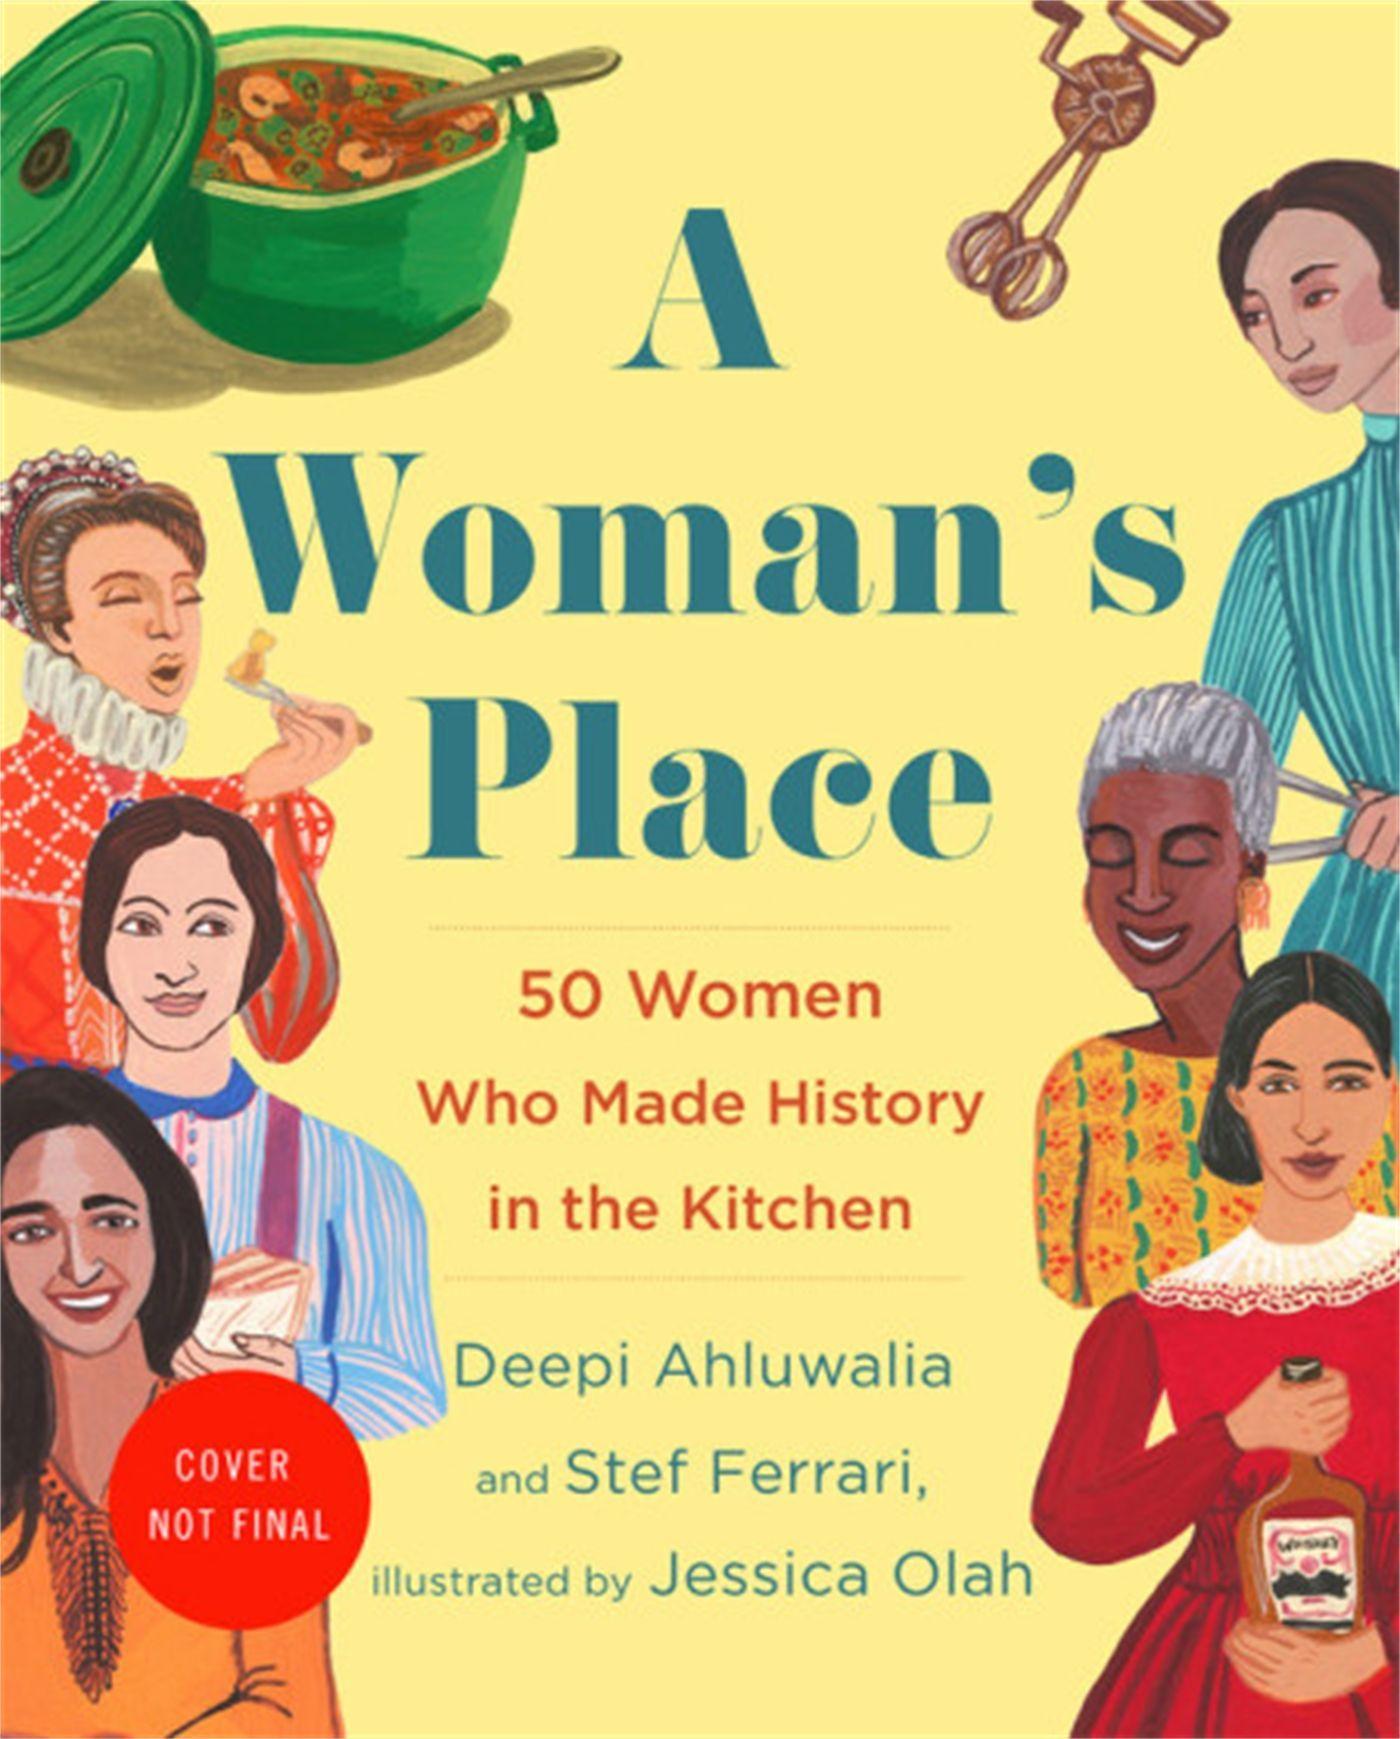 A Woman's Place / The Inventors, Rumrunners, Lawbreakers, Scientists, and Single Moms Who Changed the World with Food / Stef Ferrari (u. a.) / Buch / Gebunden / Englisch / 2019 / EAN 9780316452243 - Ferrari, Stef